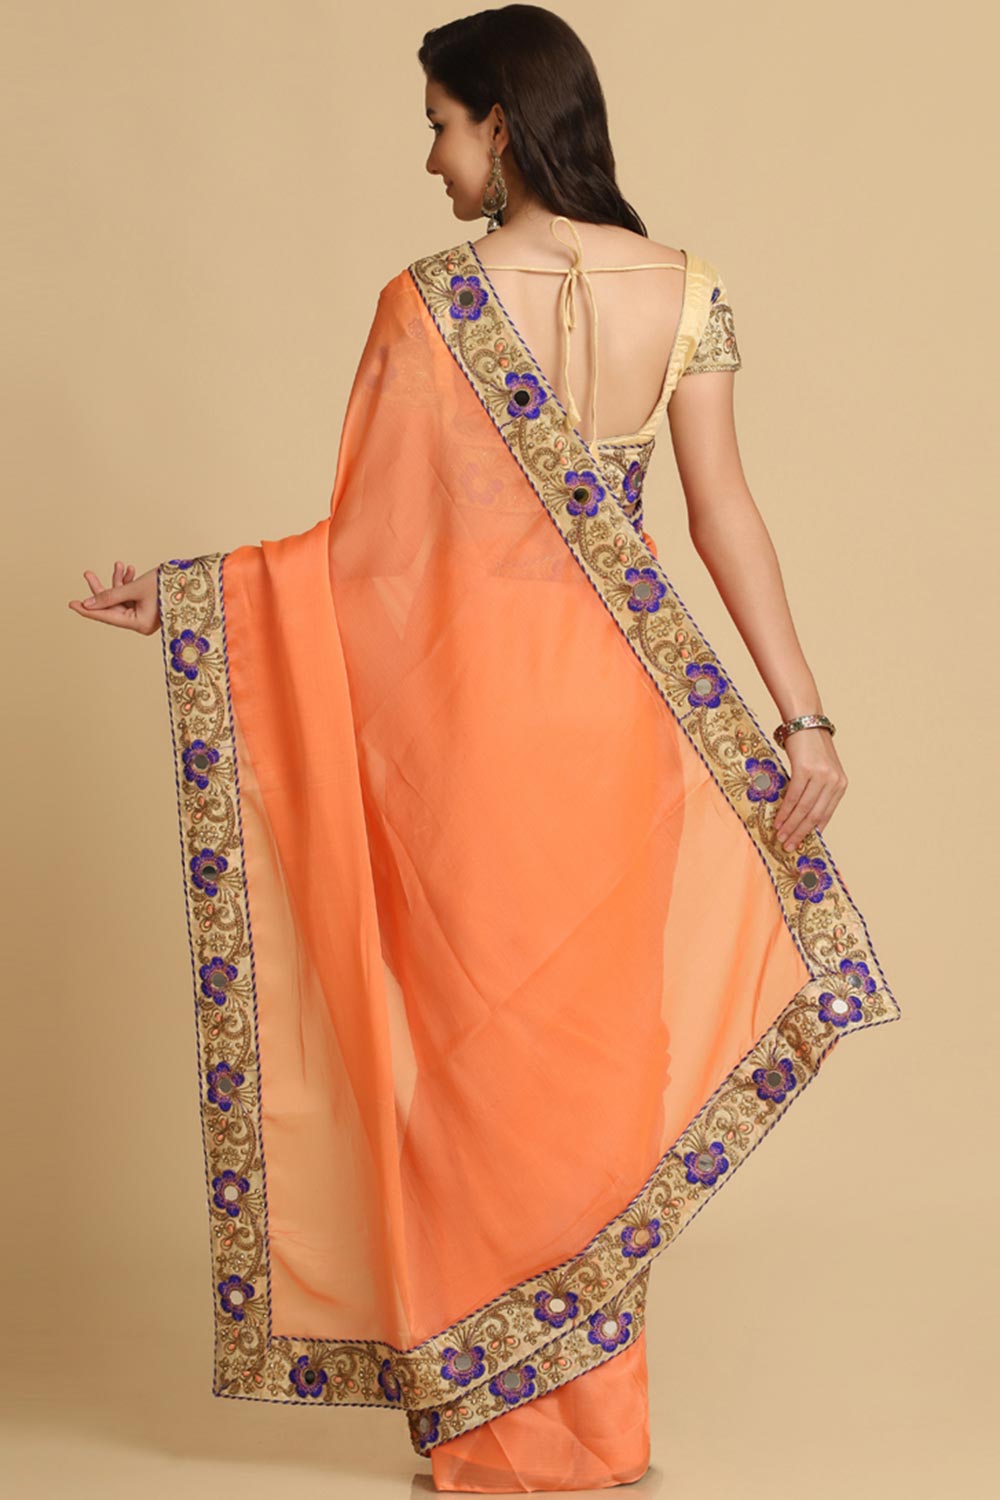 Buy Light Orange Resham Embroidery Chiffon One Minute Saree Online - Zoom Out